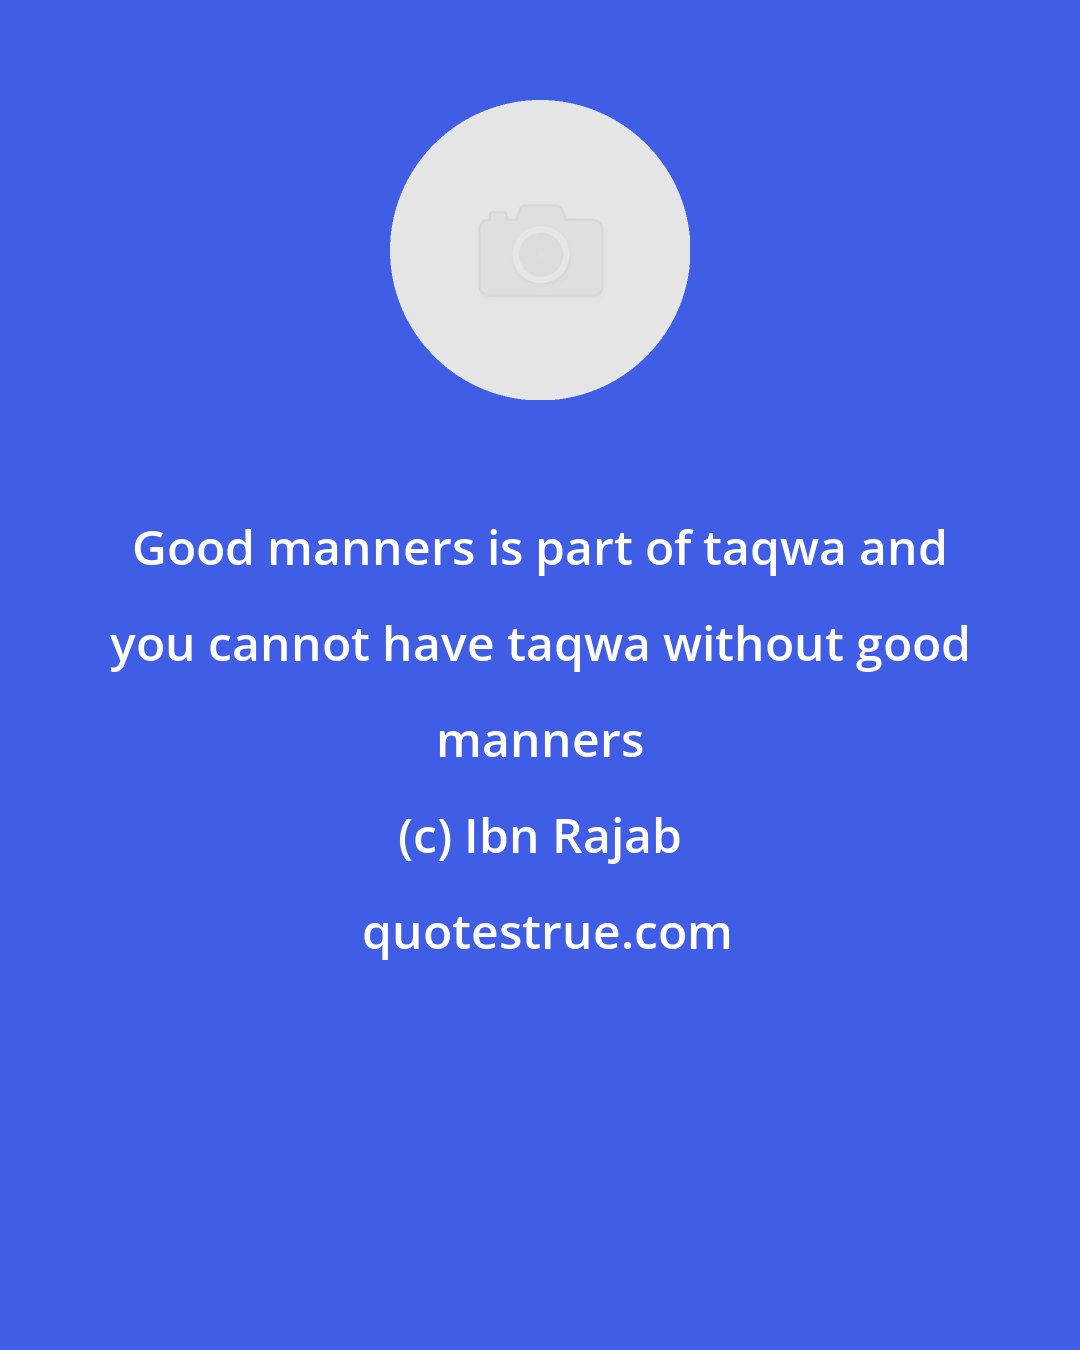 Ibn Rajab: Good manners is part of taqwa and you cannot have taqwa without good manners